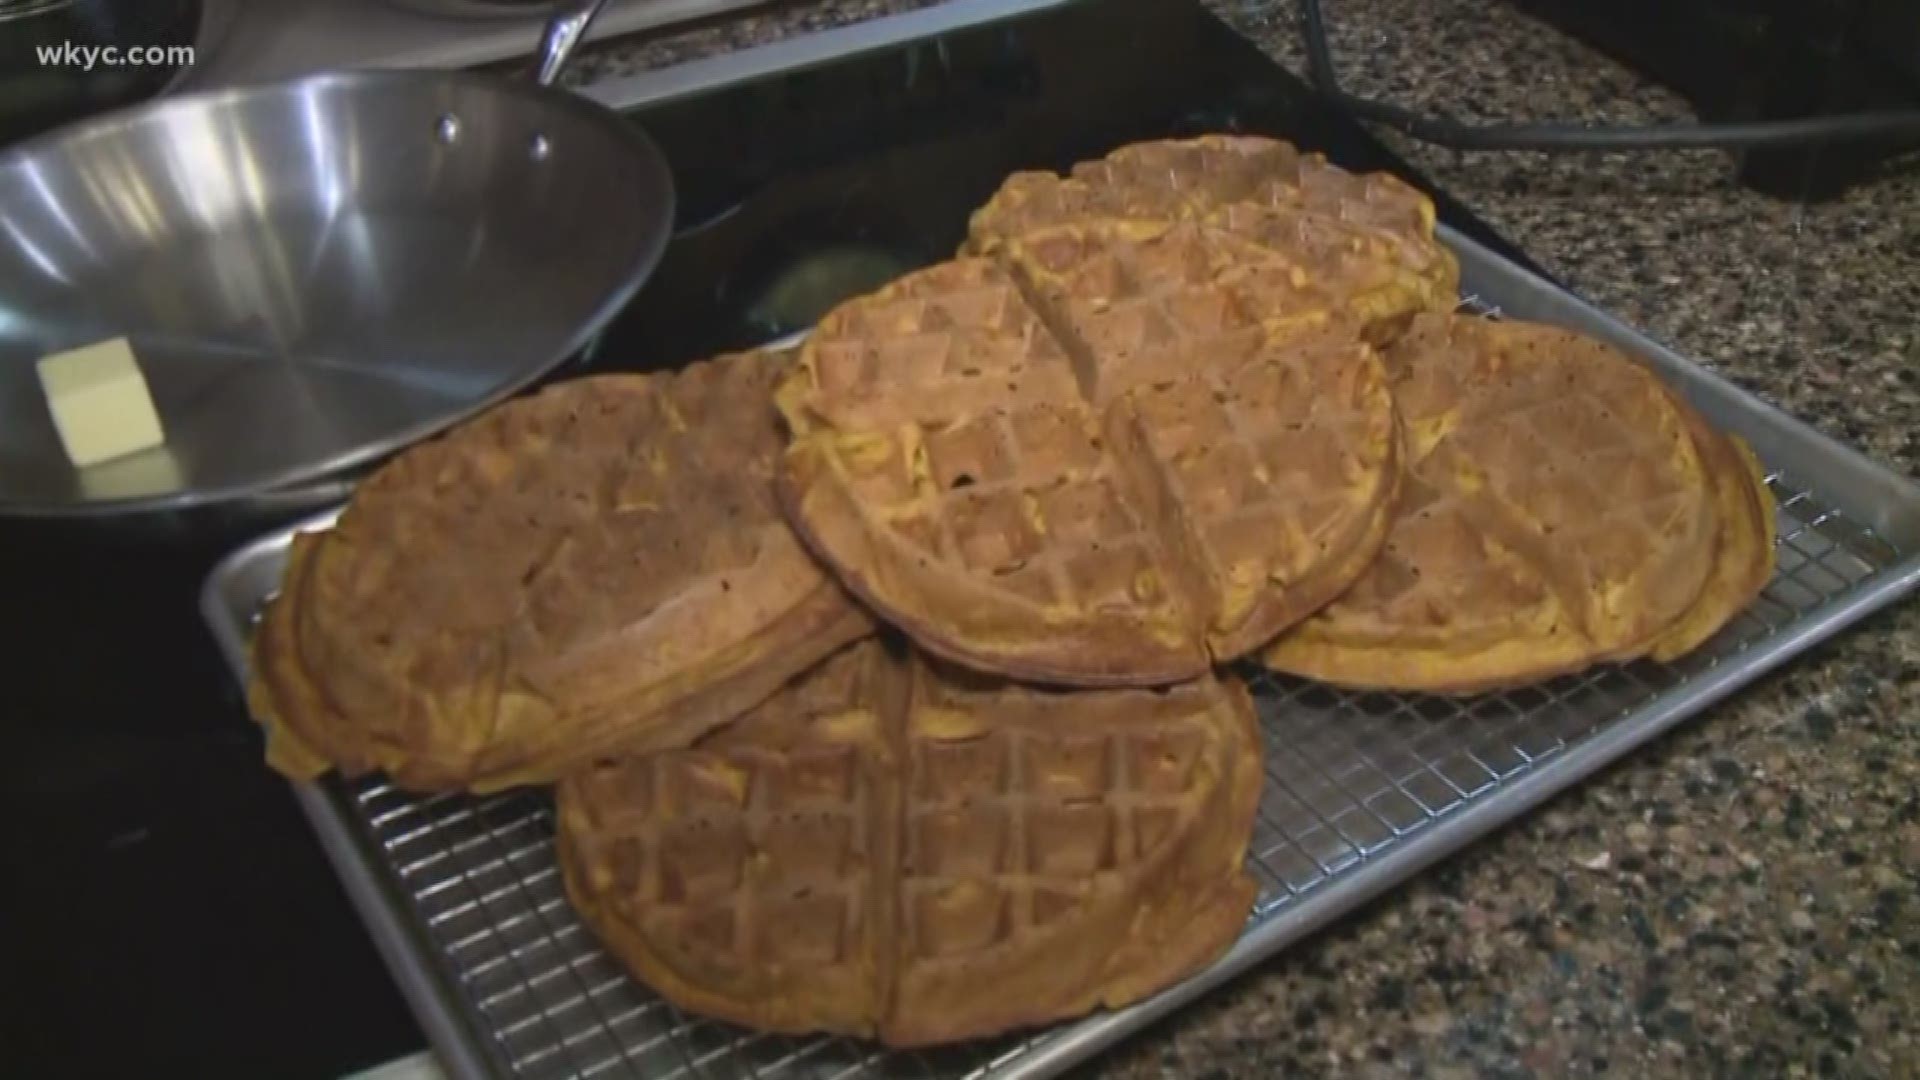 Oct. 17, 2018: Hungry? We've got the perfect fall recipe for you: Behold, pumpkin spice waffles.